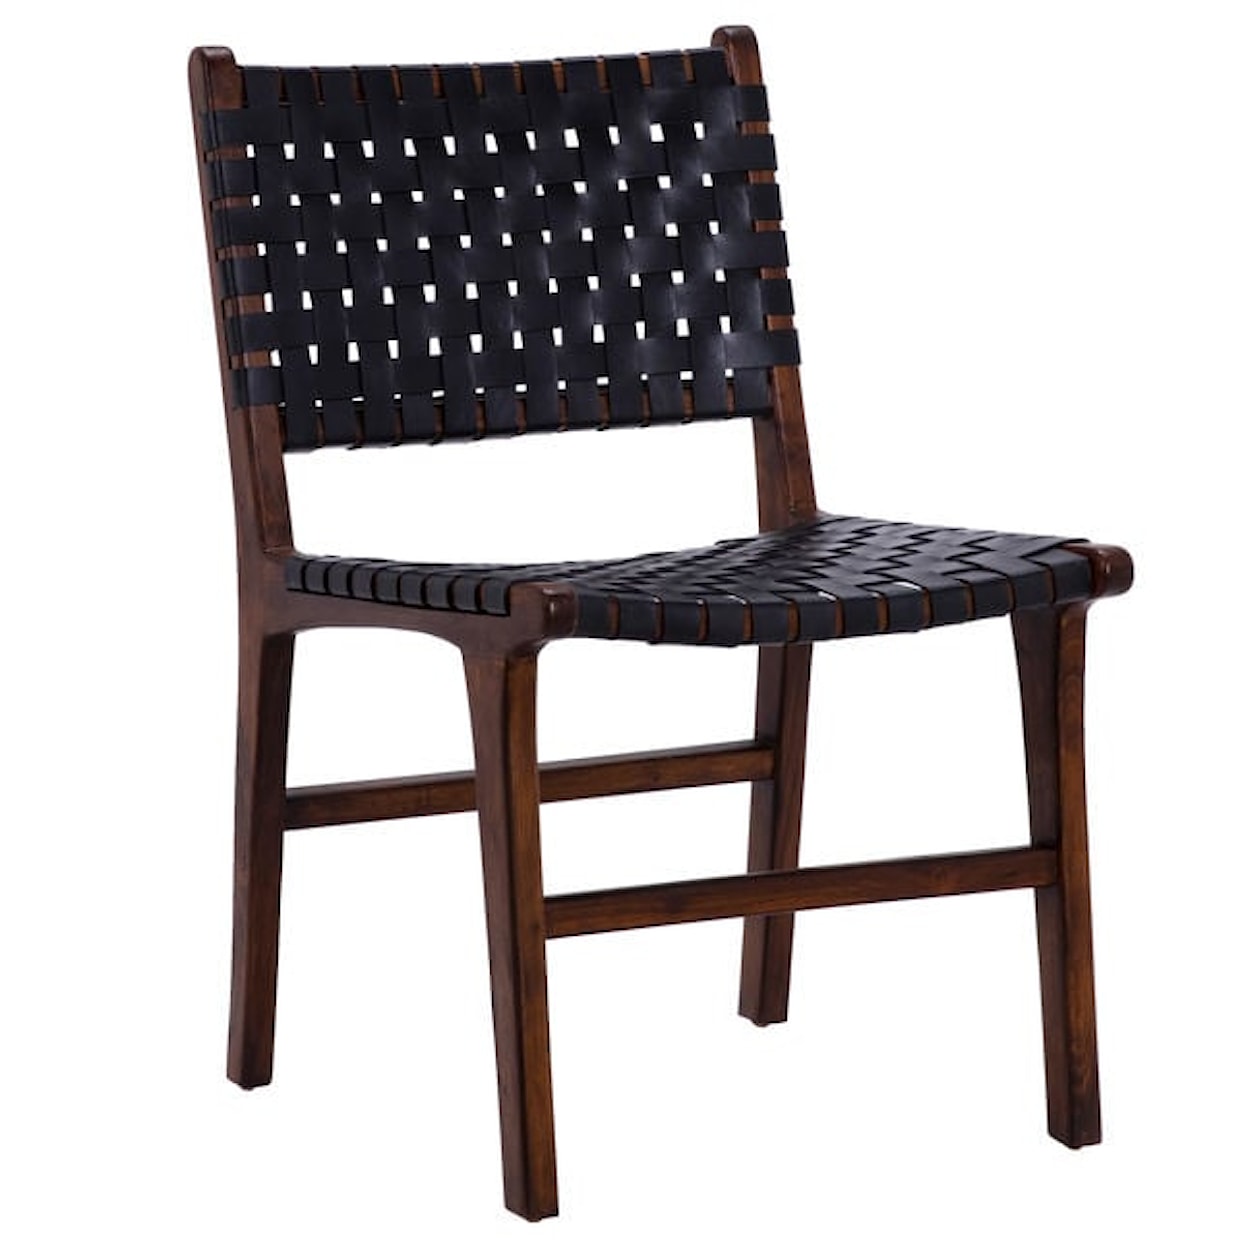 Dovetail Furniture Dale Dale Dining Chair